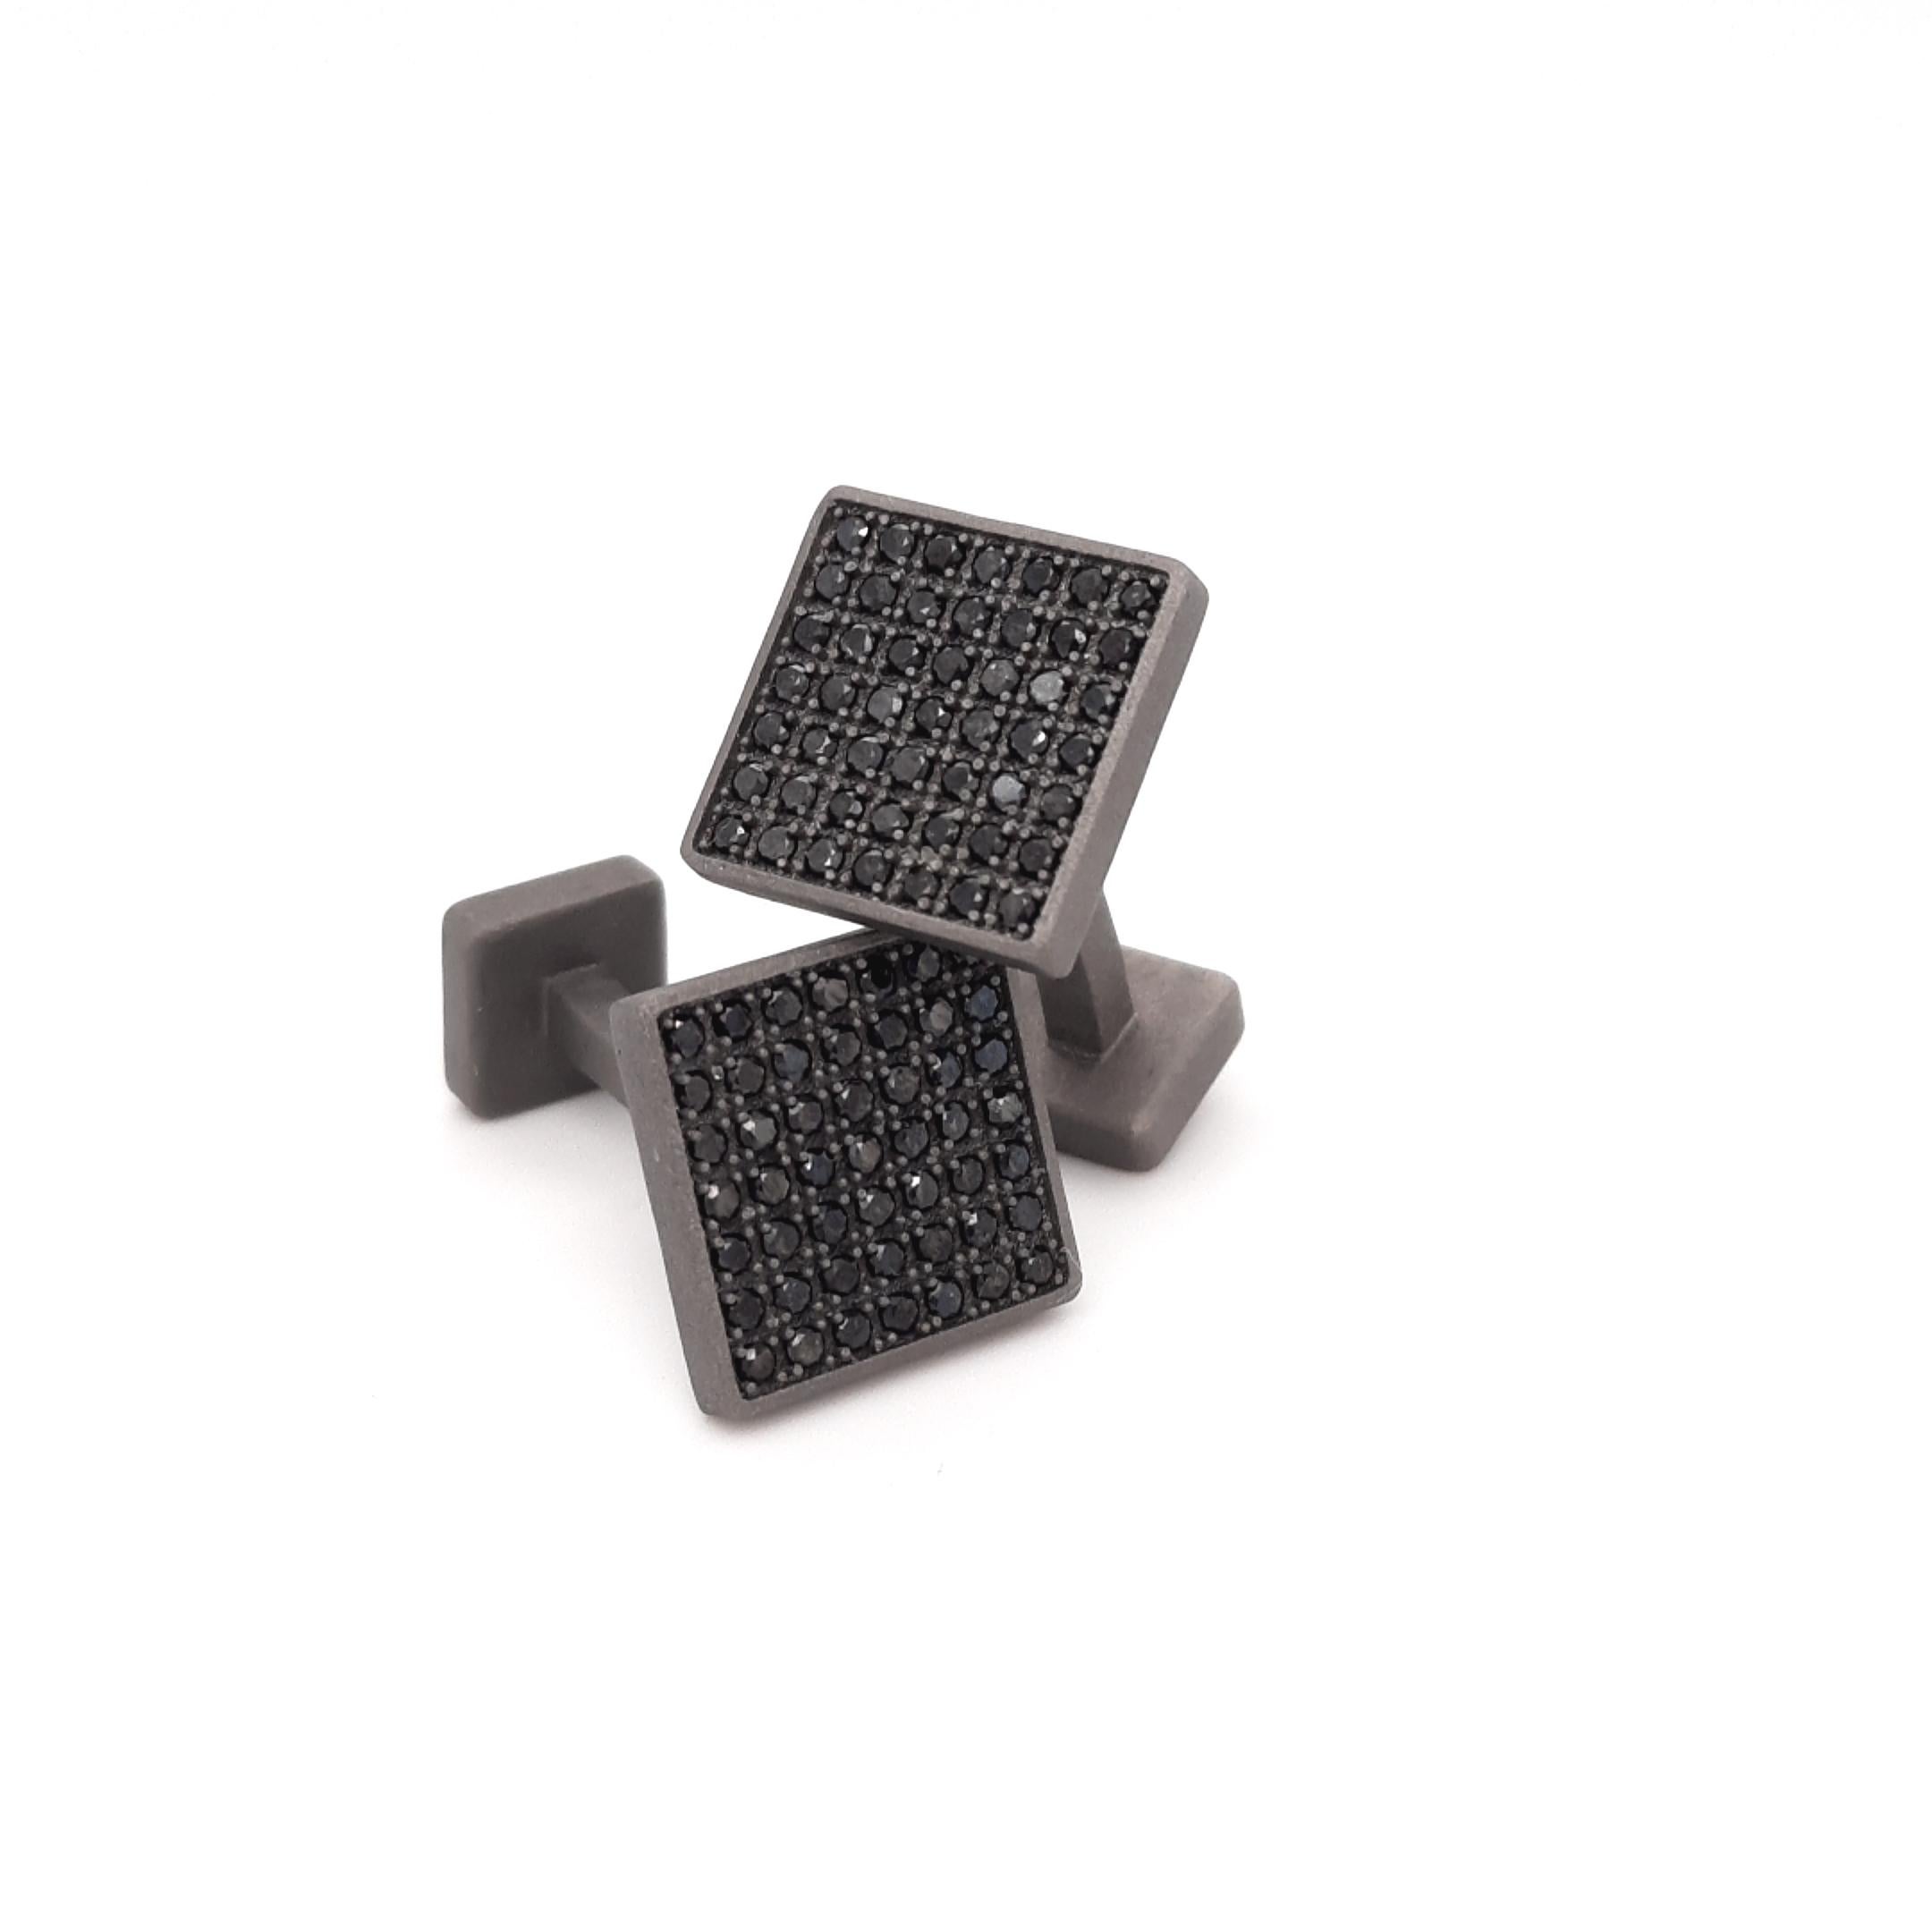 These titanium cufflinks are from Men's Collection. These square cufflinks are decorated with 98 natural round black diamonds placed in total of 0.98 Carat. The dimensions of the cufflinks are 1.25cm x 1.25cm. These cufflinks are a perfect upgrade